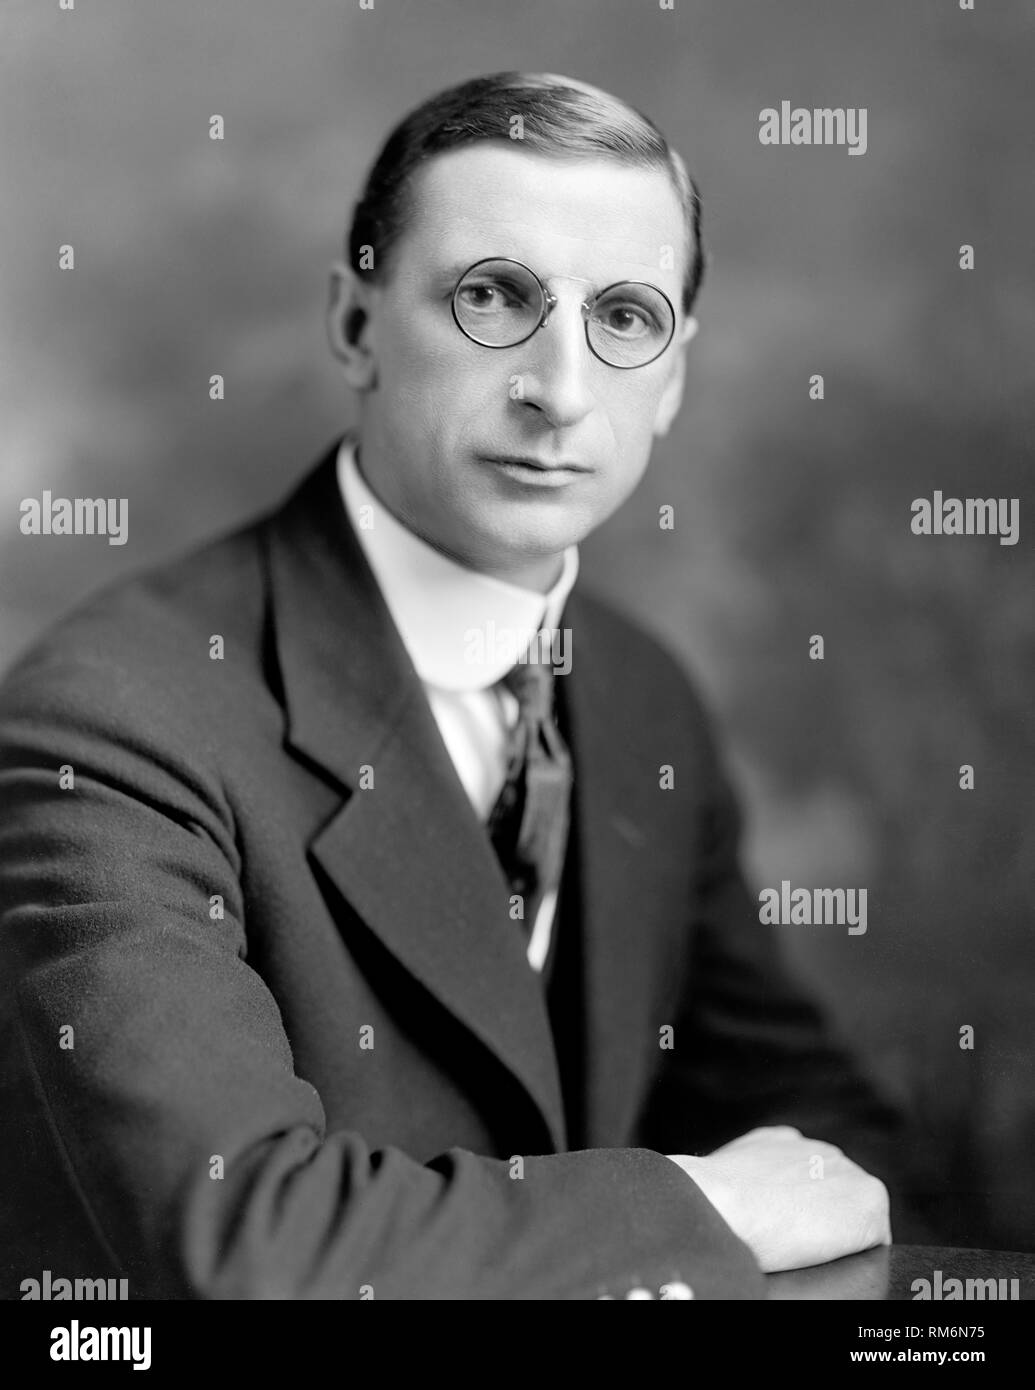 Eamon De Valera (edward de valera) irish revolutionary, head of the IRA and later taoiseach and president of ireland. De Valera avoided execution after the 1916 Easter Rising because he was a United States citizen Stock Photo